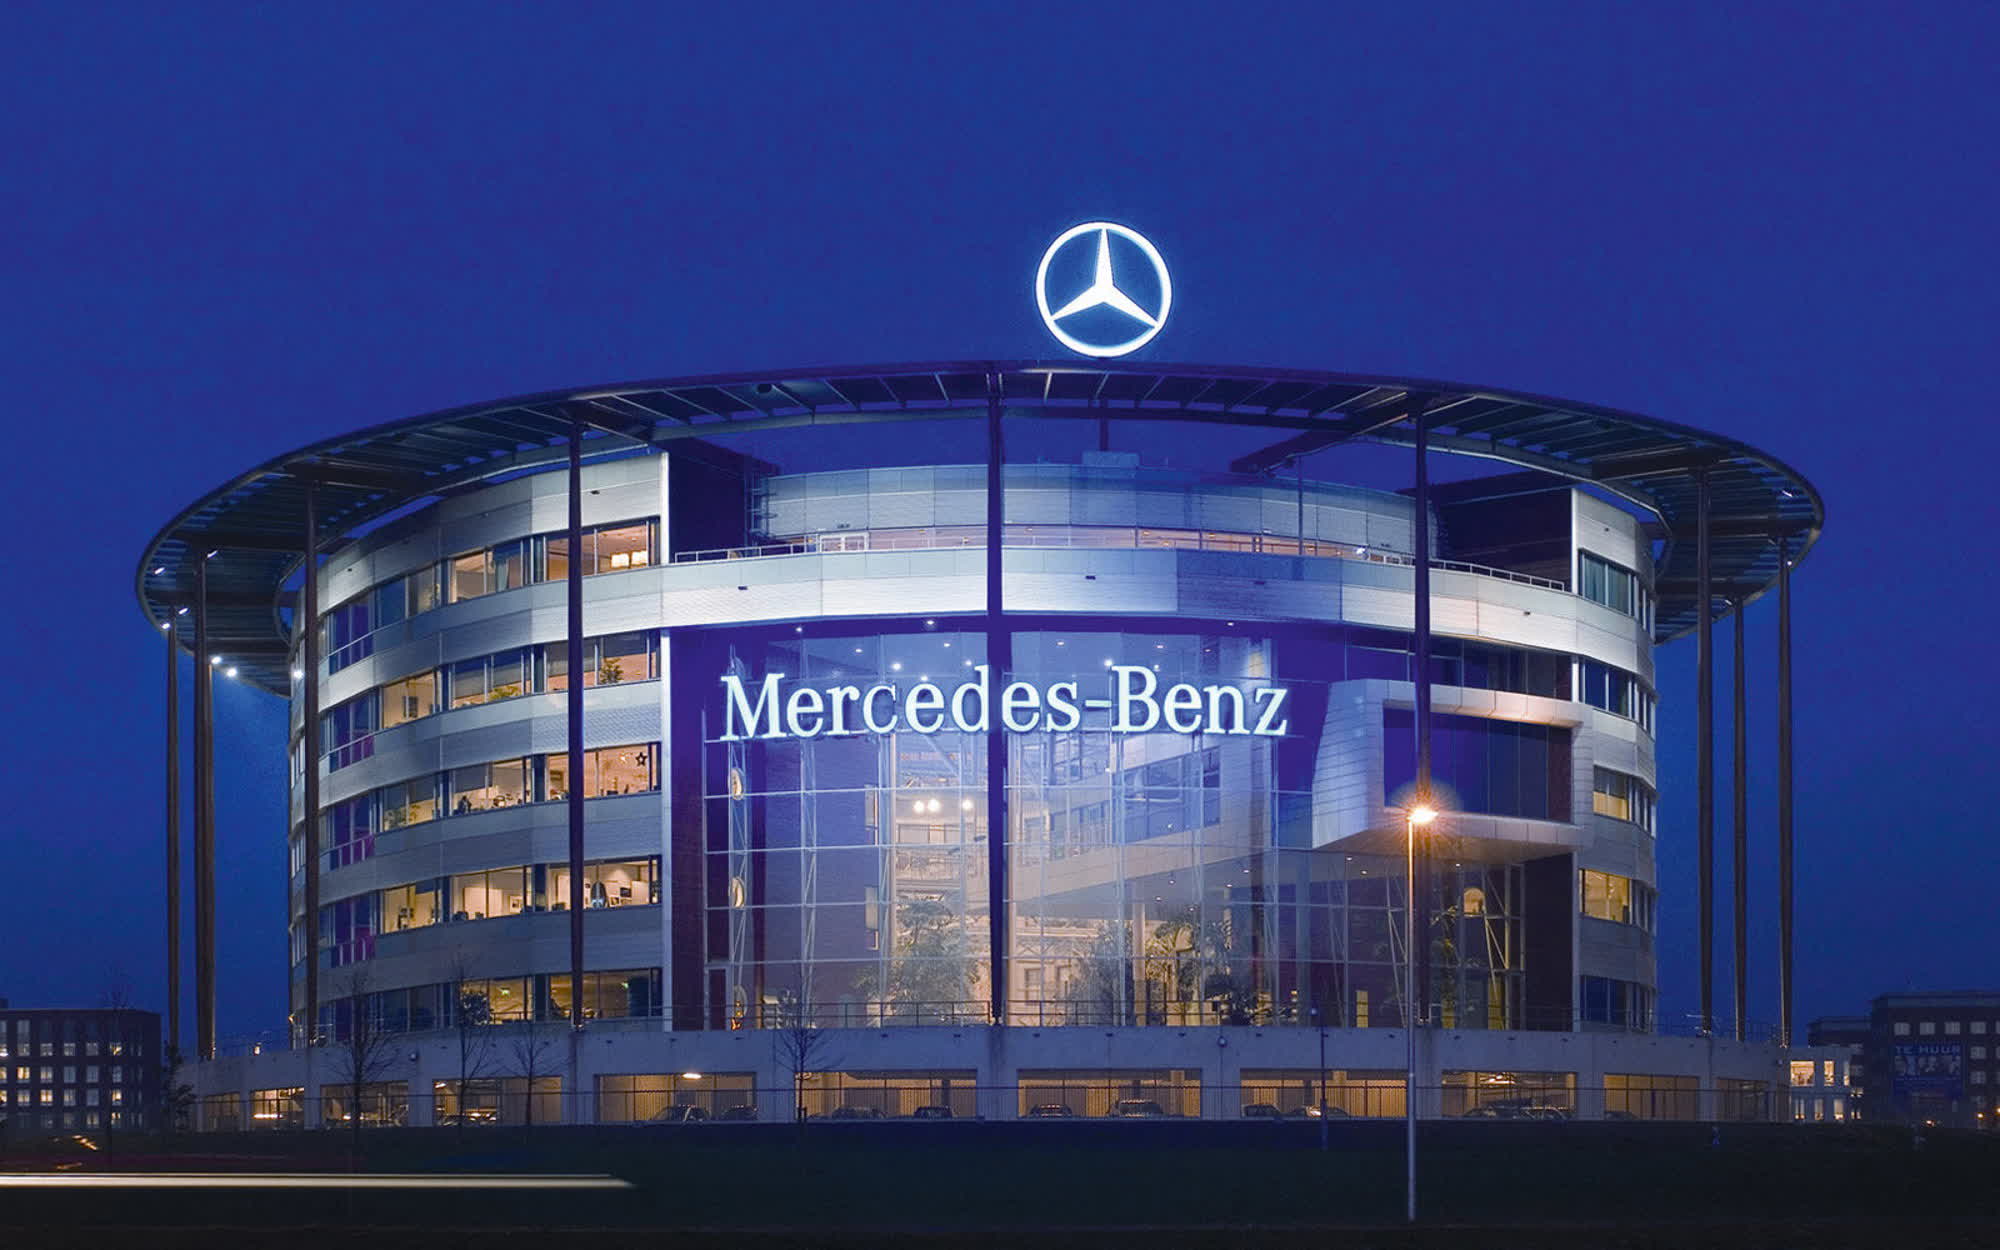 Mercedes-Benz accidentally shared its source code and business secrets with the whole world